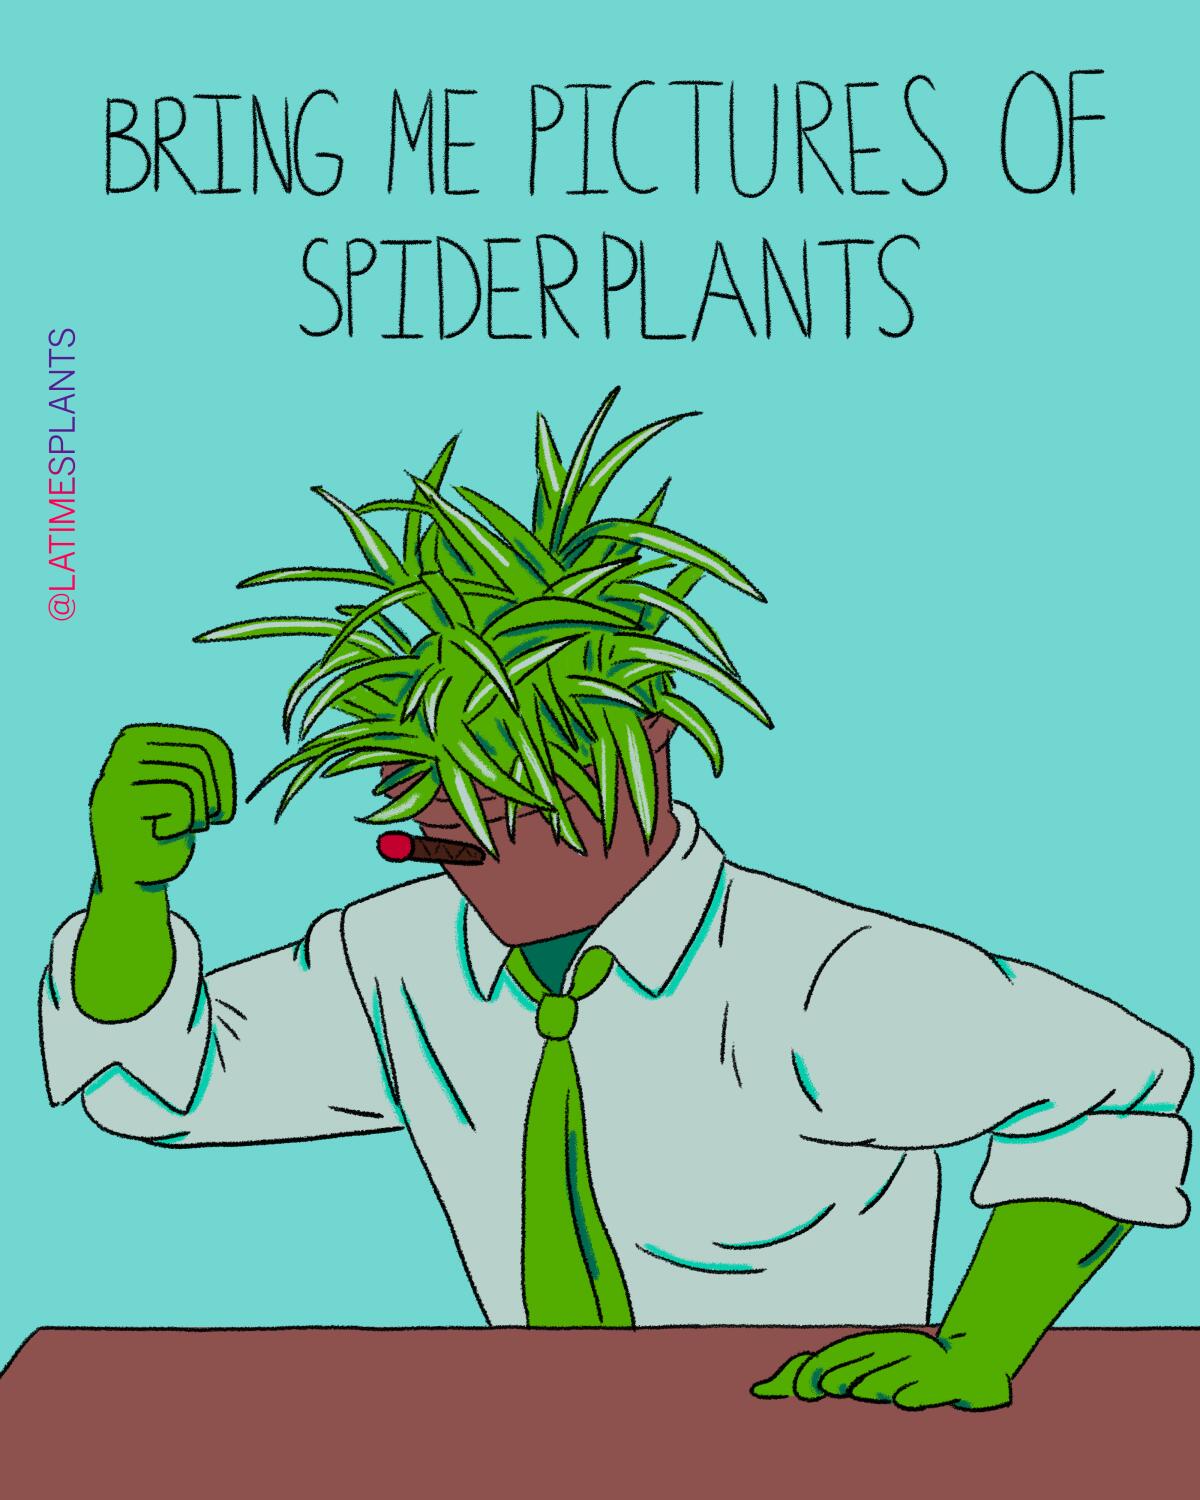 Bring me pictures of spider plants